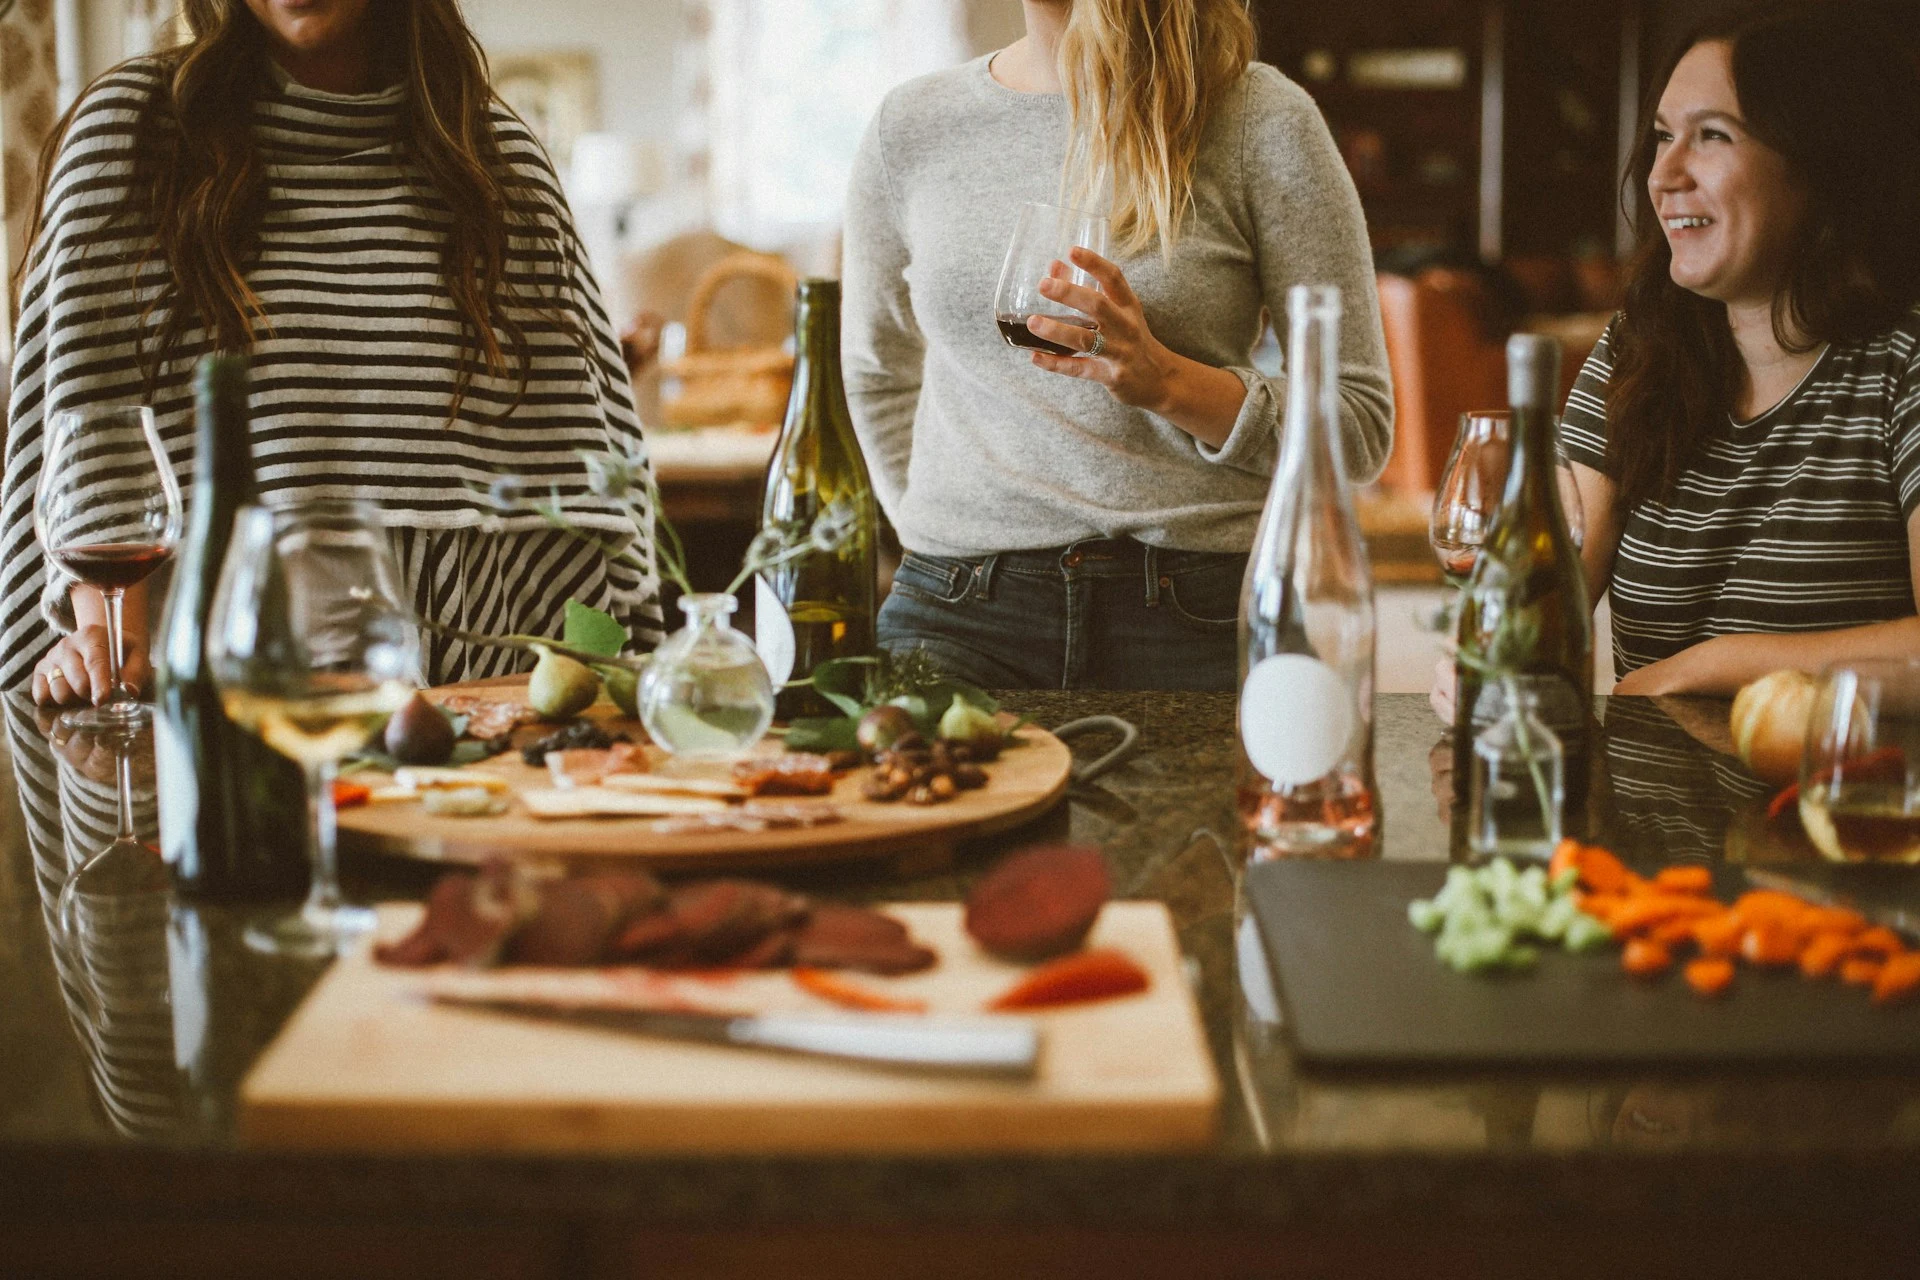 Top Tips When Preparing a Meal For Both Family & Friends In Australia